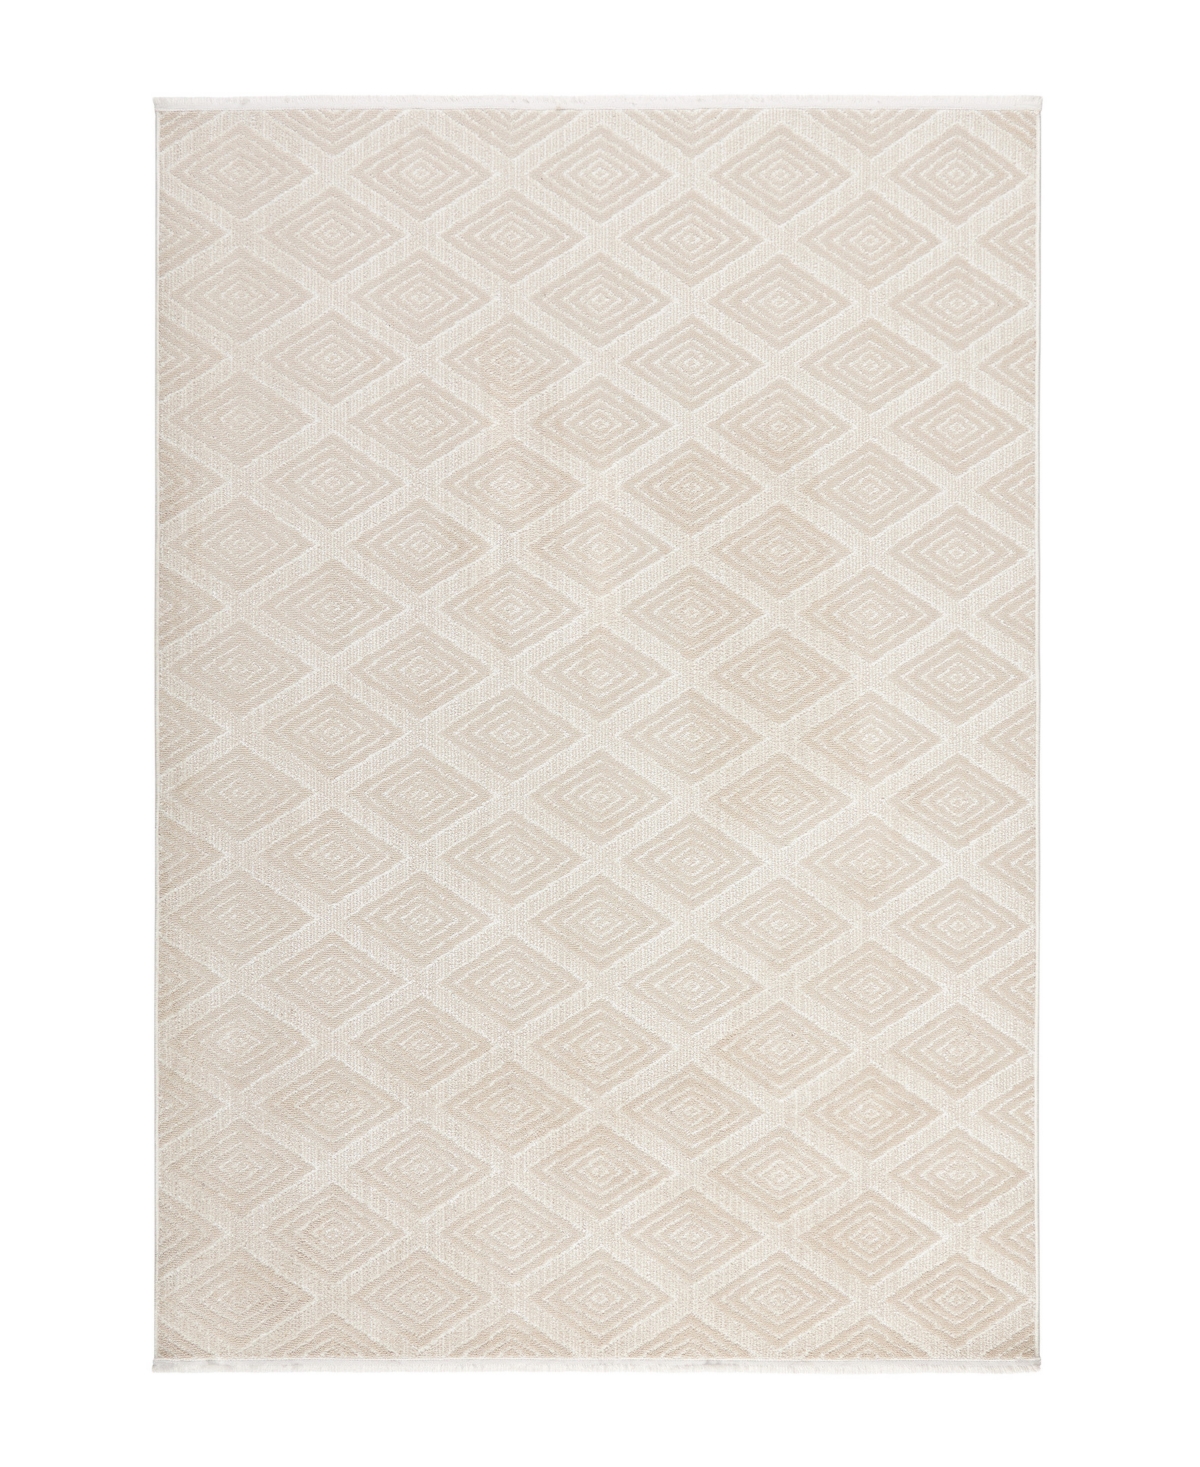 Town & Country Living Everyday Rein Everwash 87 6'6" X 9'6" Area Rug In Beige